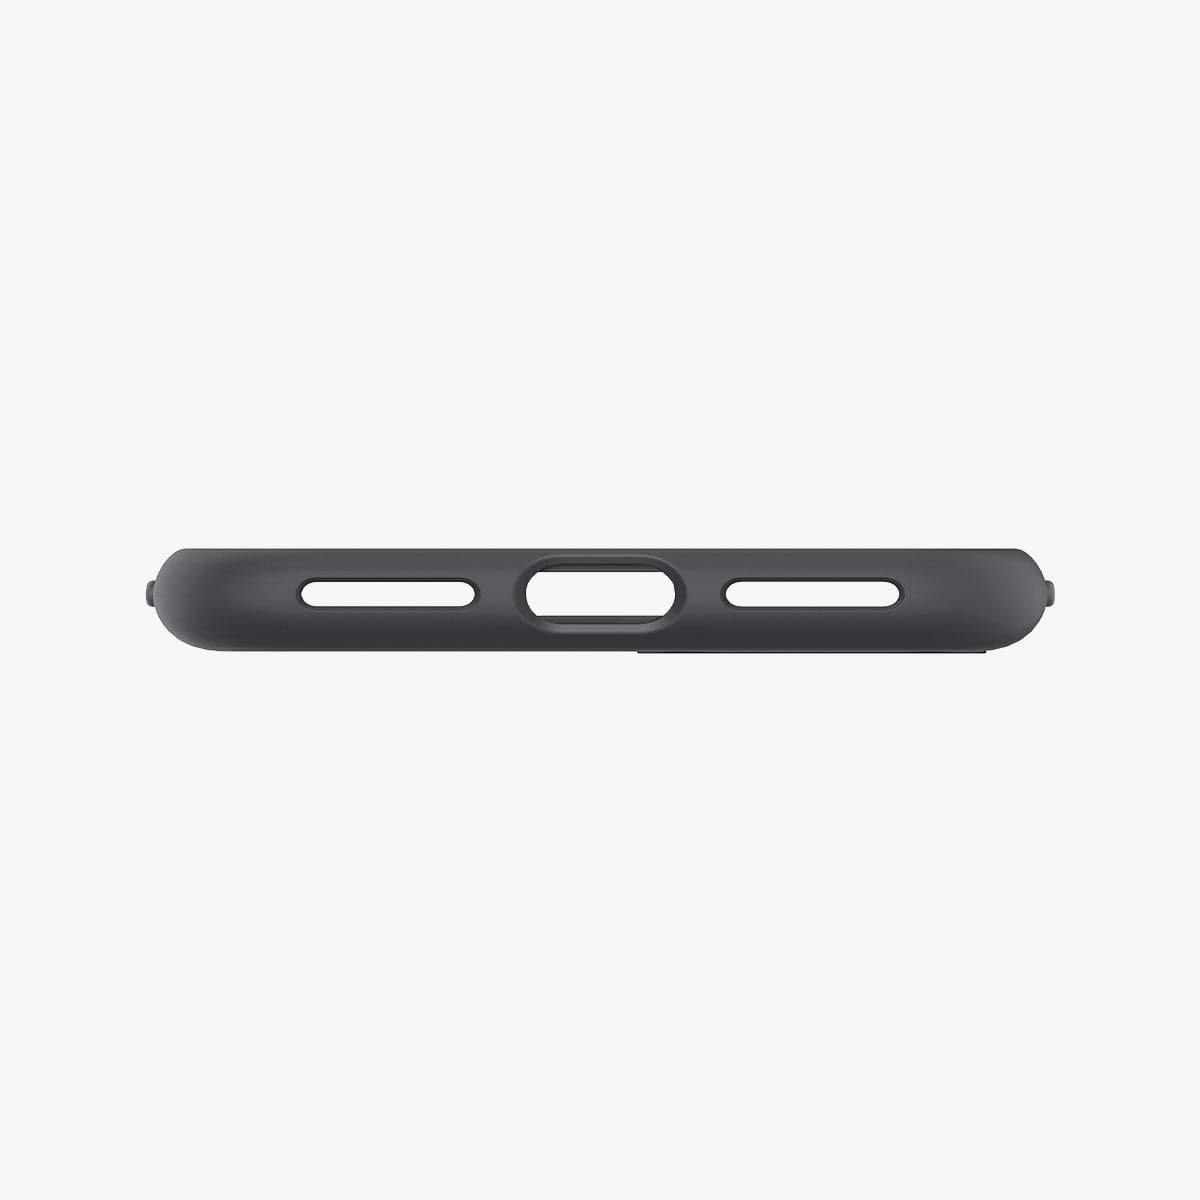 ACS04349 - iPhone 7 Series Silicone Fit Case in Black showing the bottom